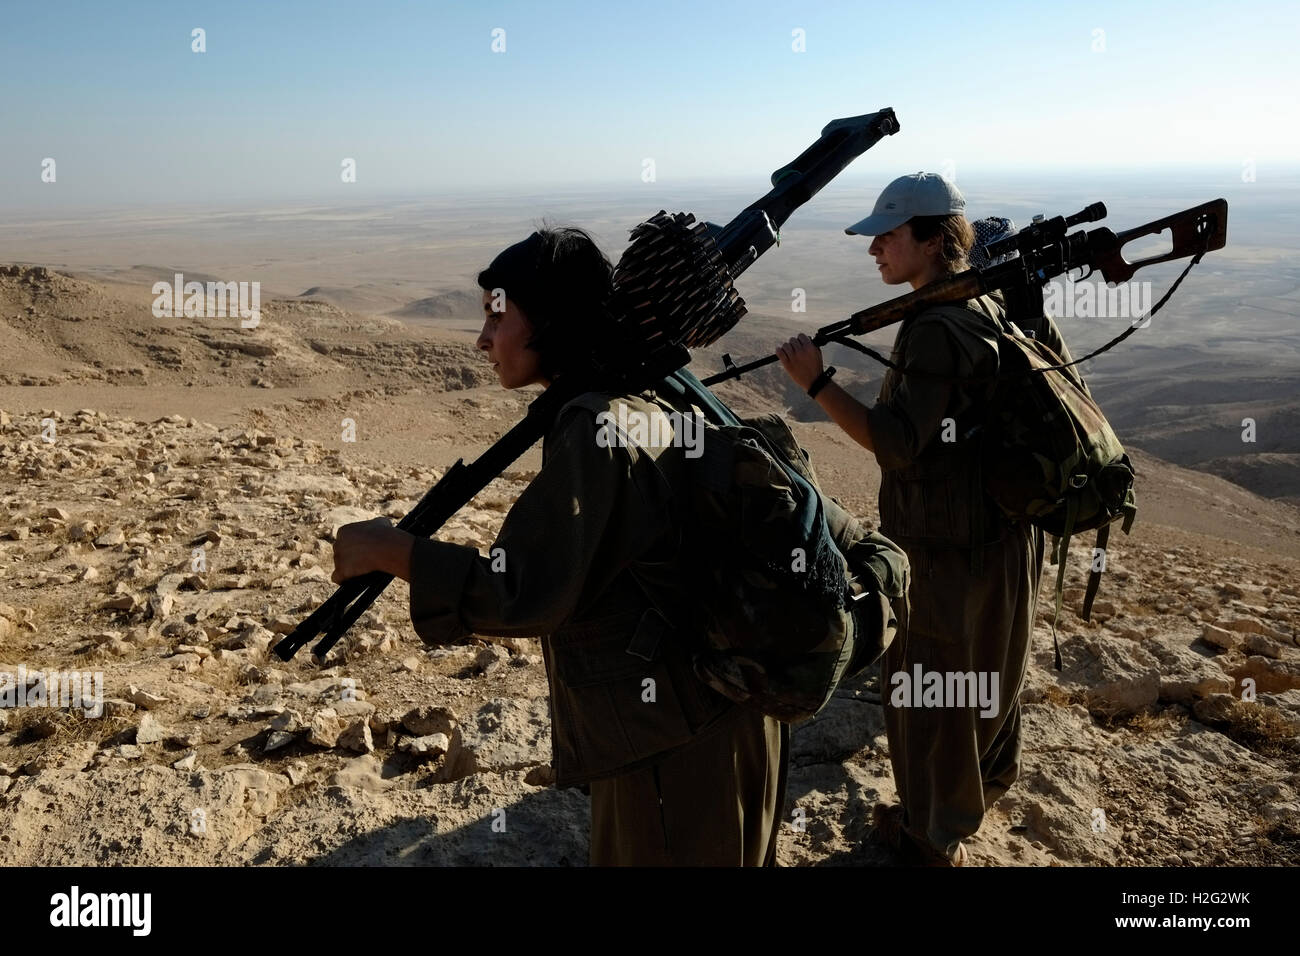 A group of female Kurdish fighters of the Free Women's Units shortened as YJA STAR the women's military wing of the Kurdistan Workers' Party PKK walking heavily armed in a mountainous area in the countryside of Makhmur near Mosul Northern Iraq Stock Photo